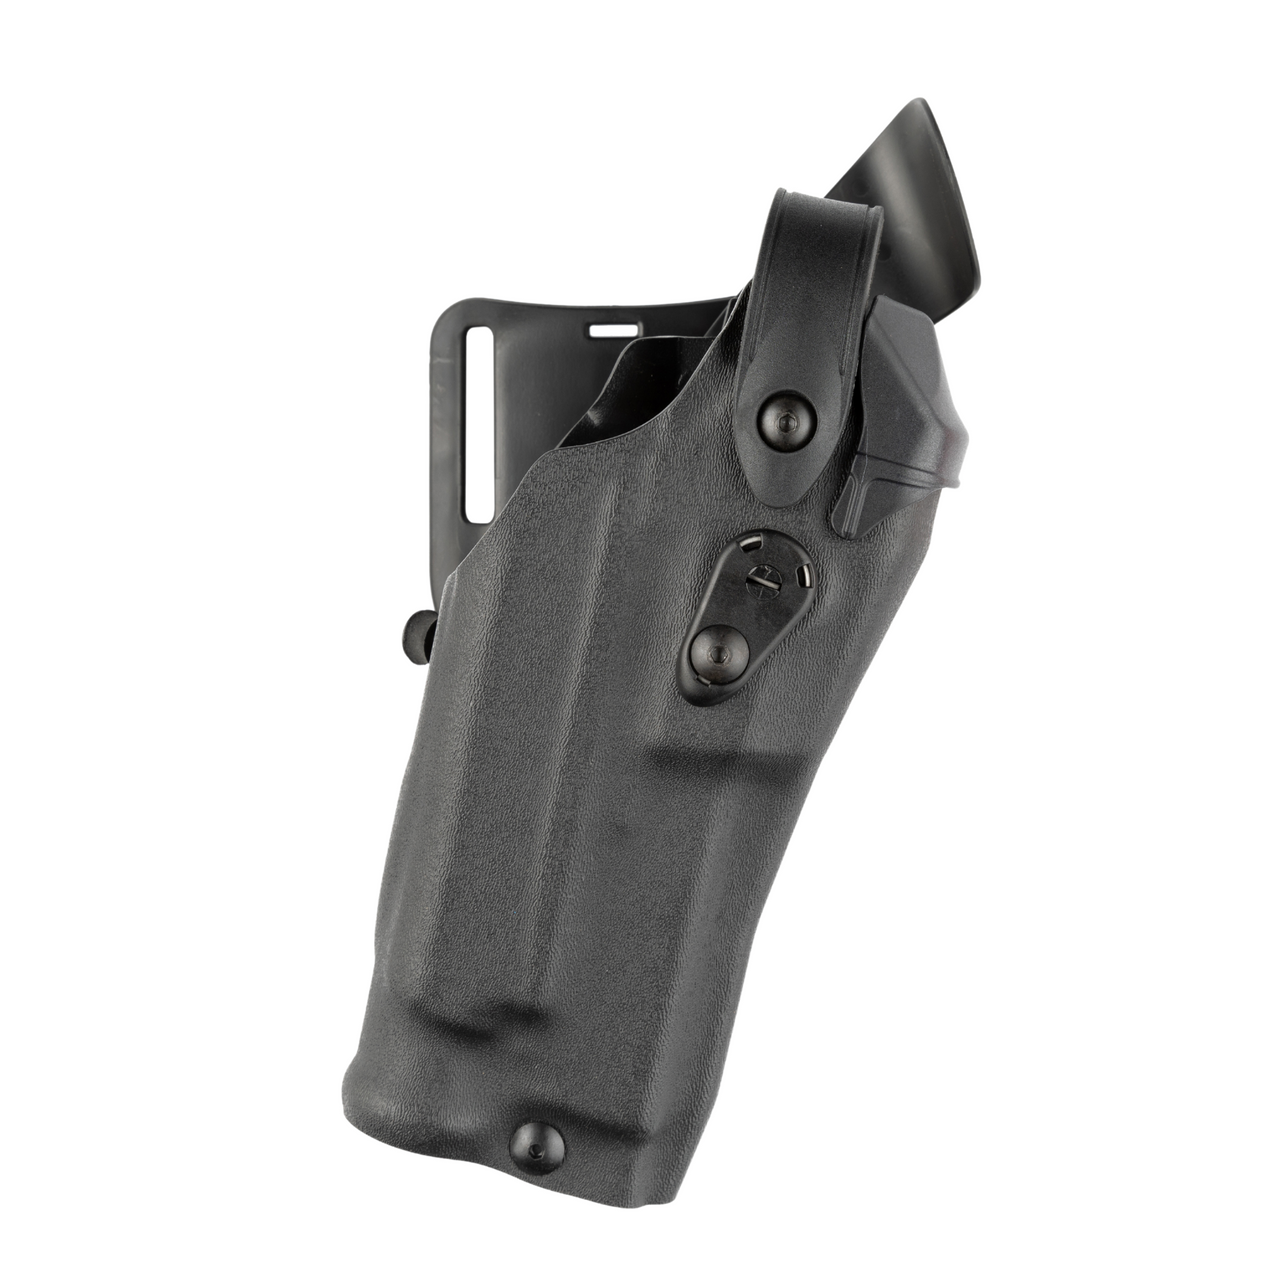 51126 SAFARILAND 6360RDS - ALS/SLS MID-RIDE, DUTY RATED LEVEL III RETENTION HOLSTER